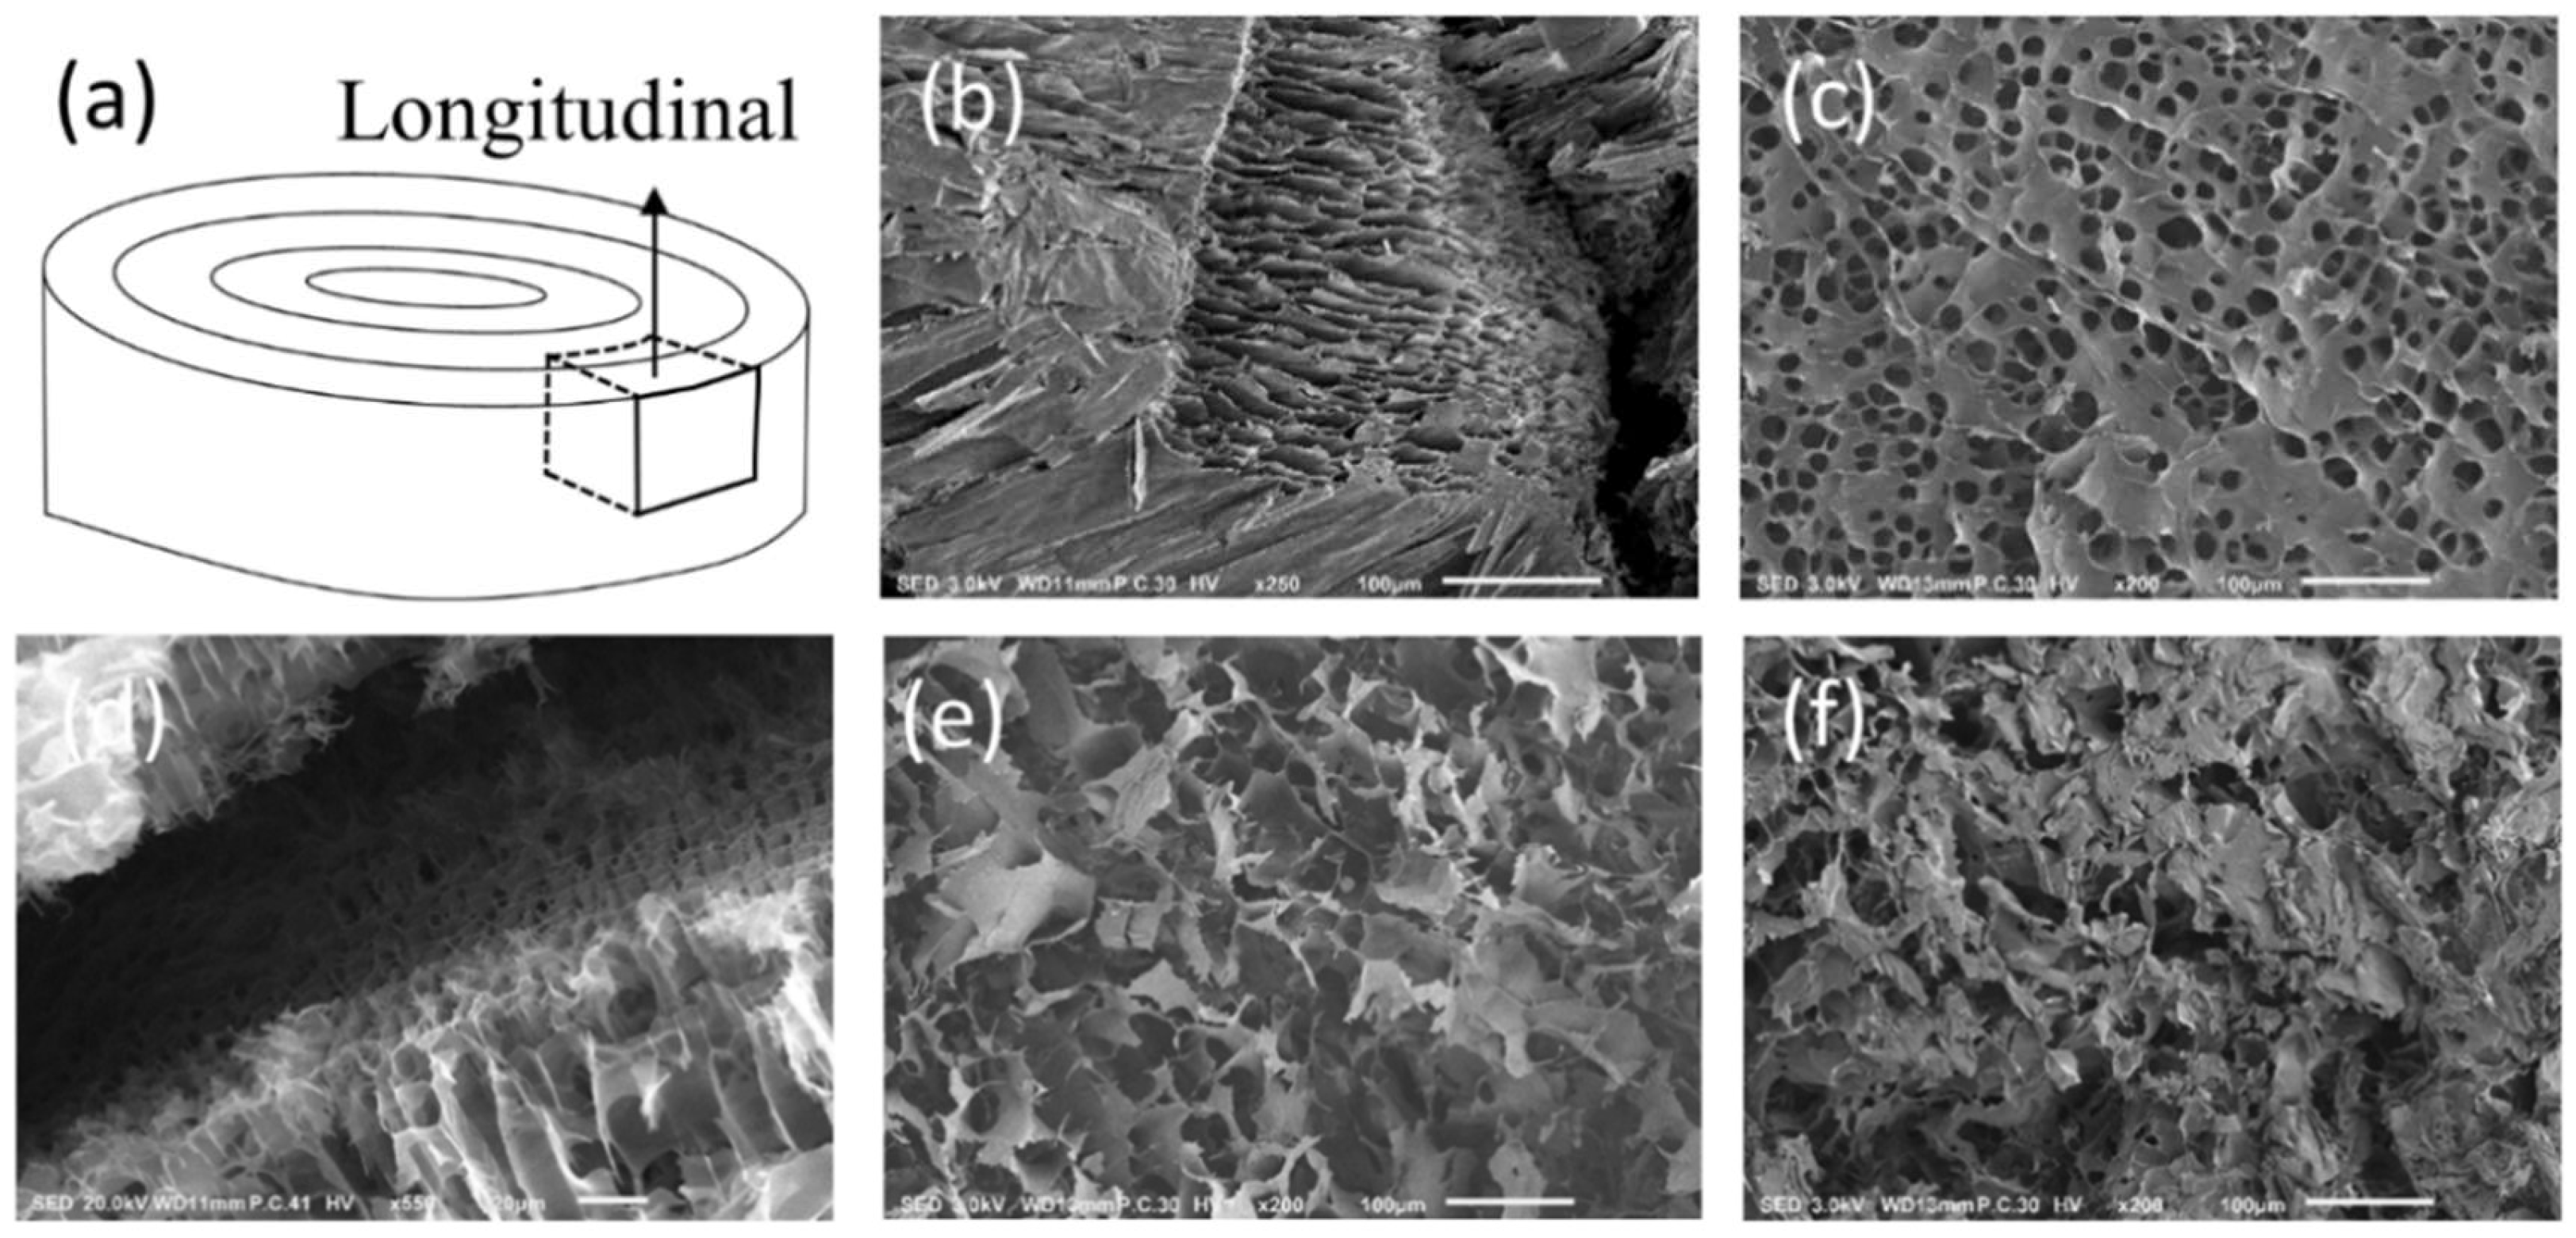 Colloids And Interfaces Free Full Text Direct Cryo Writing Of Aerogels Via 3d Printing Of Aligned Cellulose Nanocrystals Inspired By The Plant Cell Wall Html